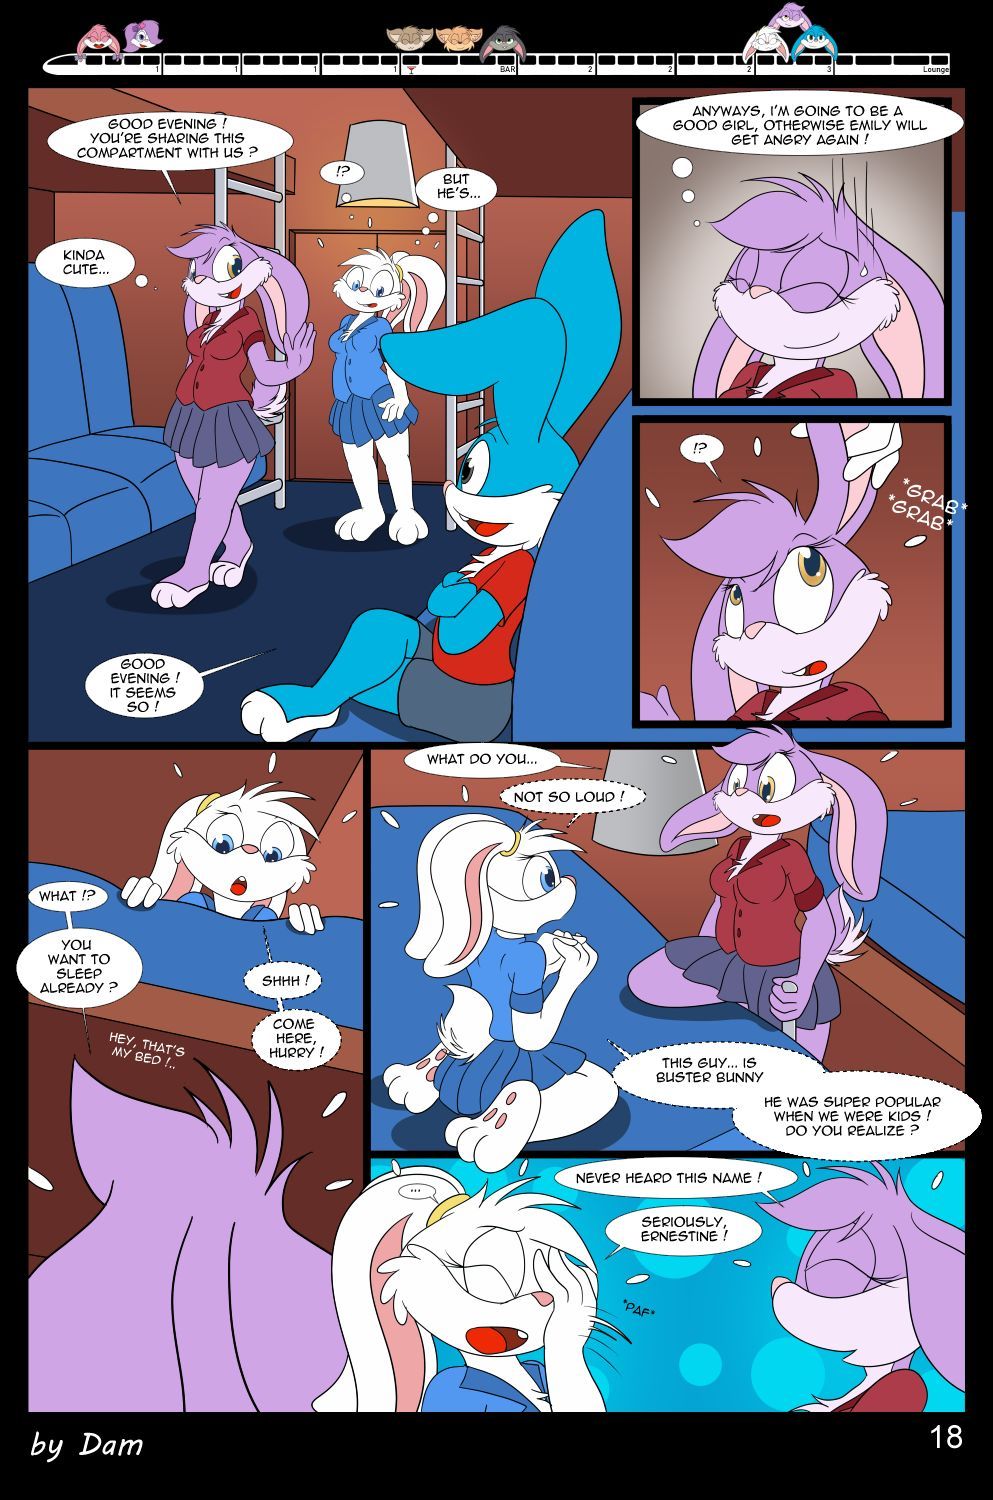 [Dam] Toons on a train [Ongoing] 18